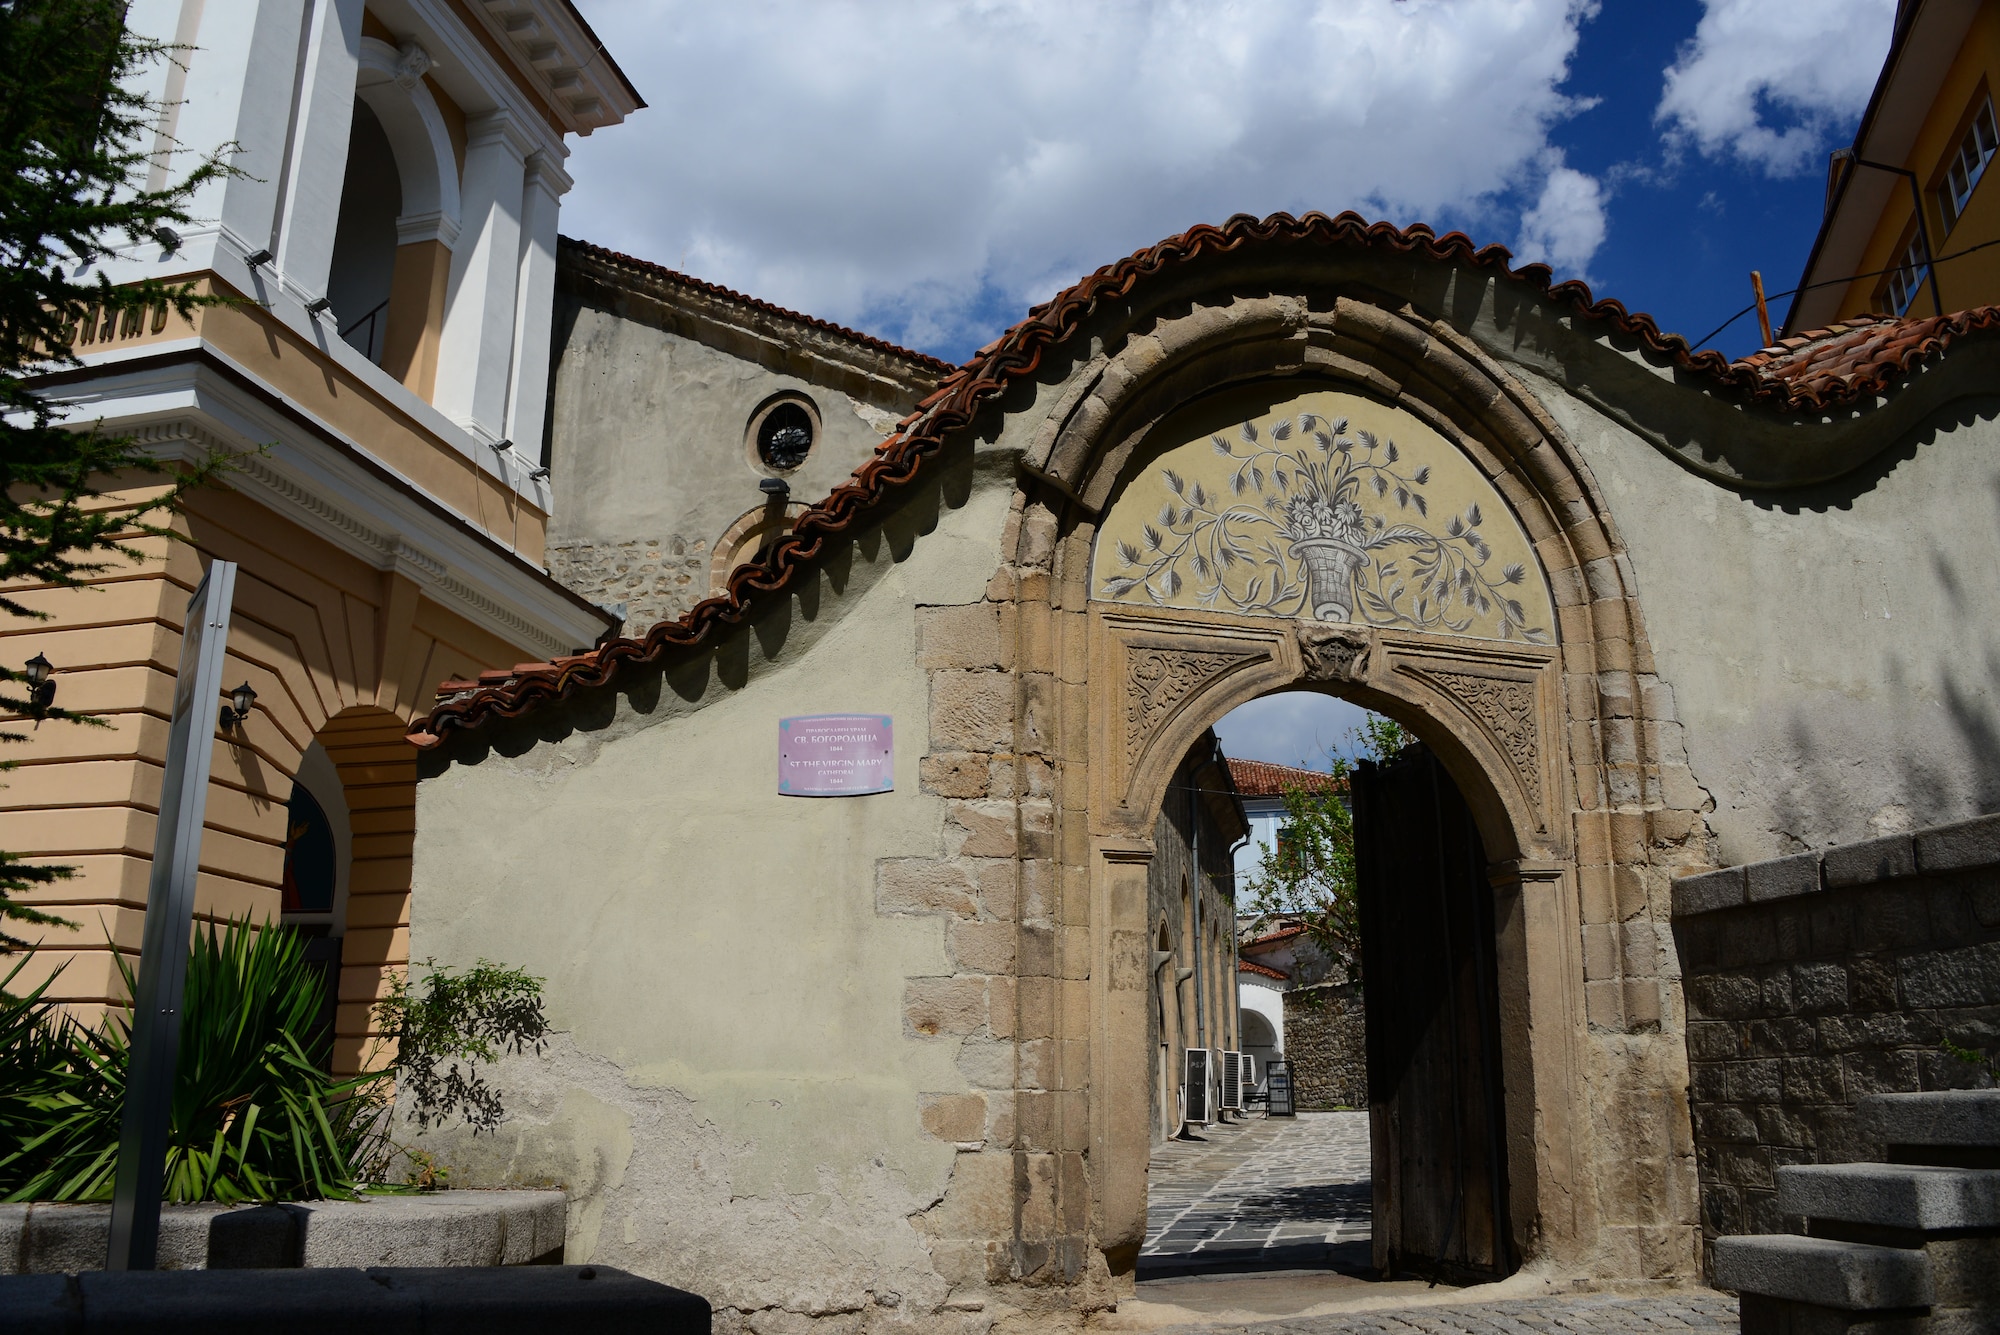 The doorway leading to the St. The Virgin Mary Cathedral (Est. 1844) in Nessebar, Bulgaria.  Airmen and Soldiers from the Tennessee National Guard enjoyed touring the resort town on the Black Sea as part of a  Morale Wellness and Recreation event Aug. 12., 2016 while deployed to Novo Selo Training Area, Bulgaria.  Tennessee National Guard Soldiers and Airmen were on rotations as part of Operation Resolute Castle 16, an ongoing operation of military construction to build up Eastern European base infrastructure and help strengthen ties between Tennessee's state partnership with Bulgaria.  (U.S. Air National Guard photo by Master Sgt. Kendra M. Owenby, 134 ARW Public Affairs)